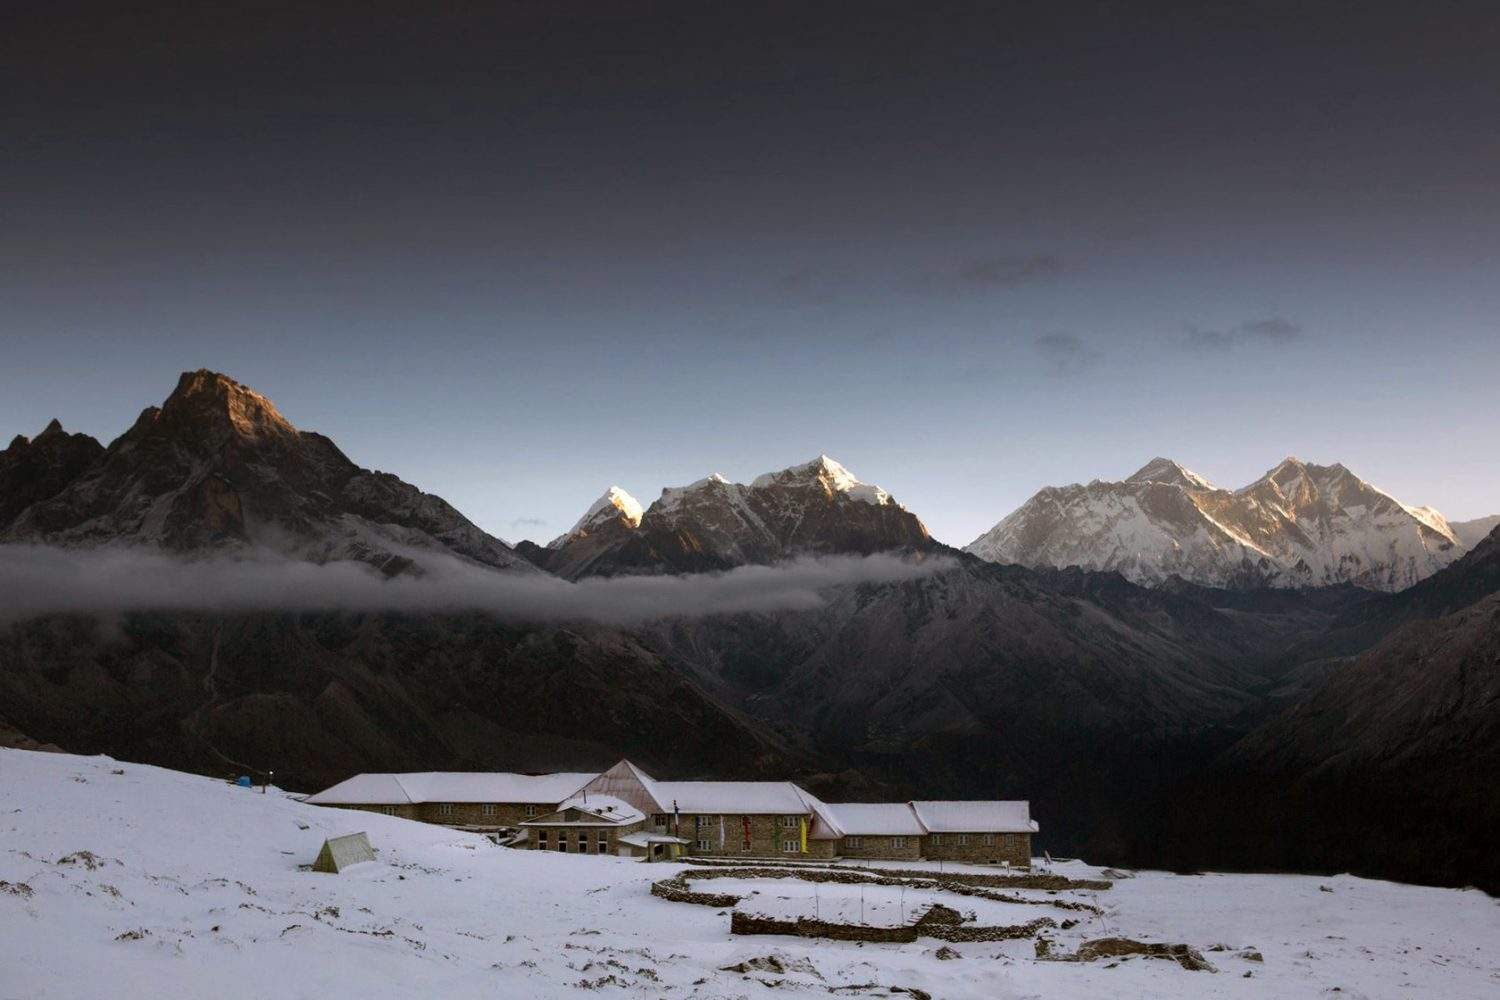 MLN lodges with the view of Mount Everest